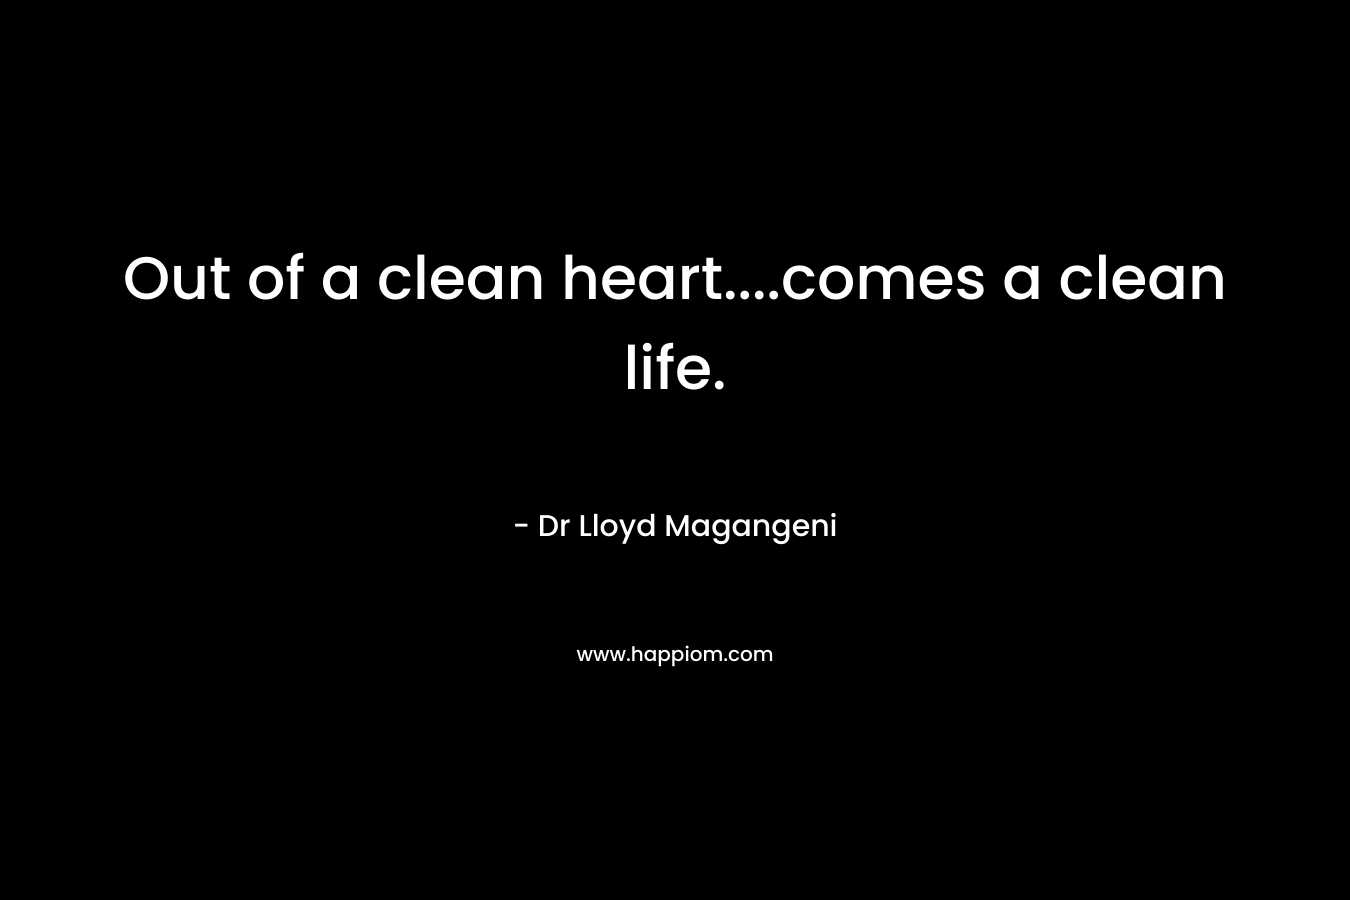 Out of a clean heart....comes a clean life.